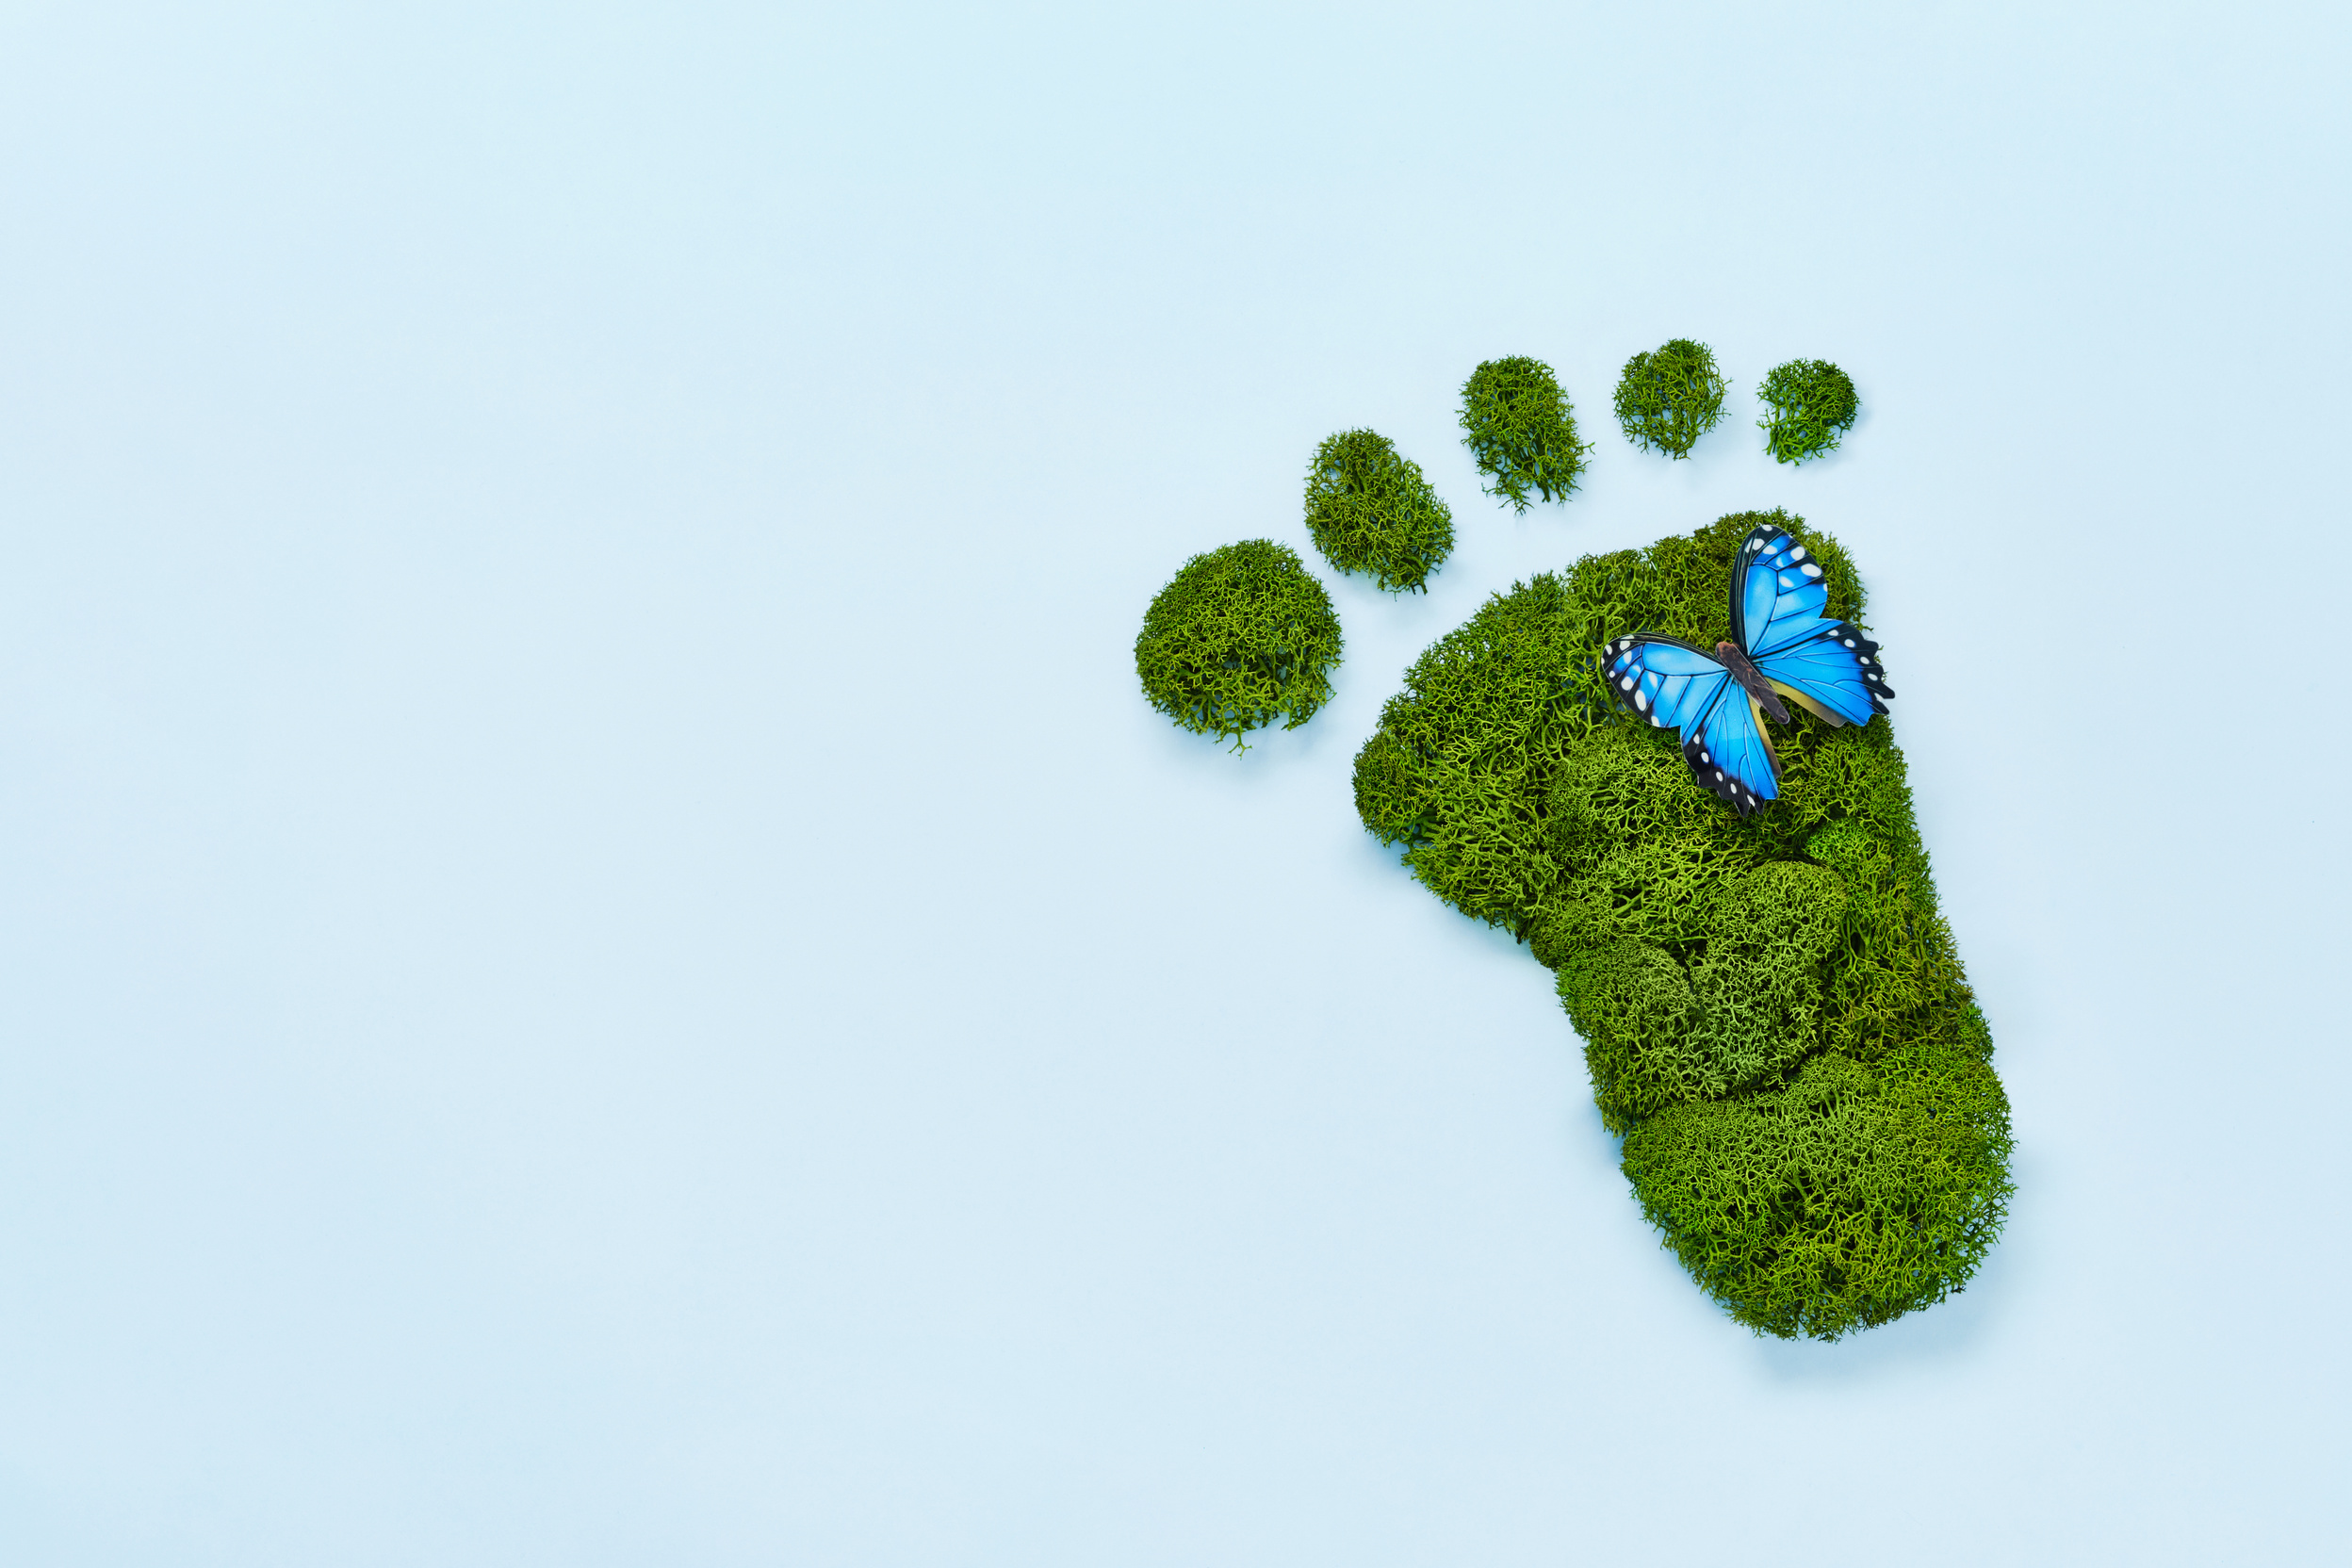 Creative Eco, Environmental Care, Earth Day Concept. Barefoot Footprint Made of Natural Green Moss and Butterfly on Blue Background